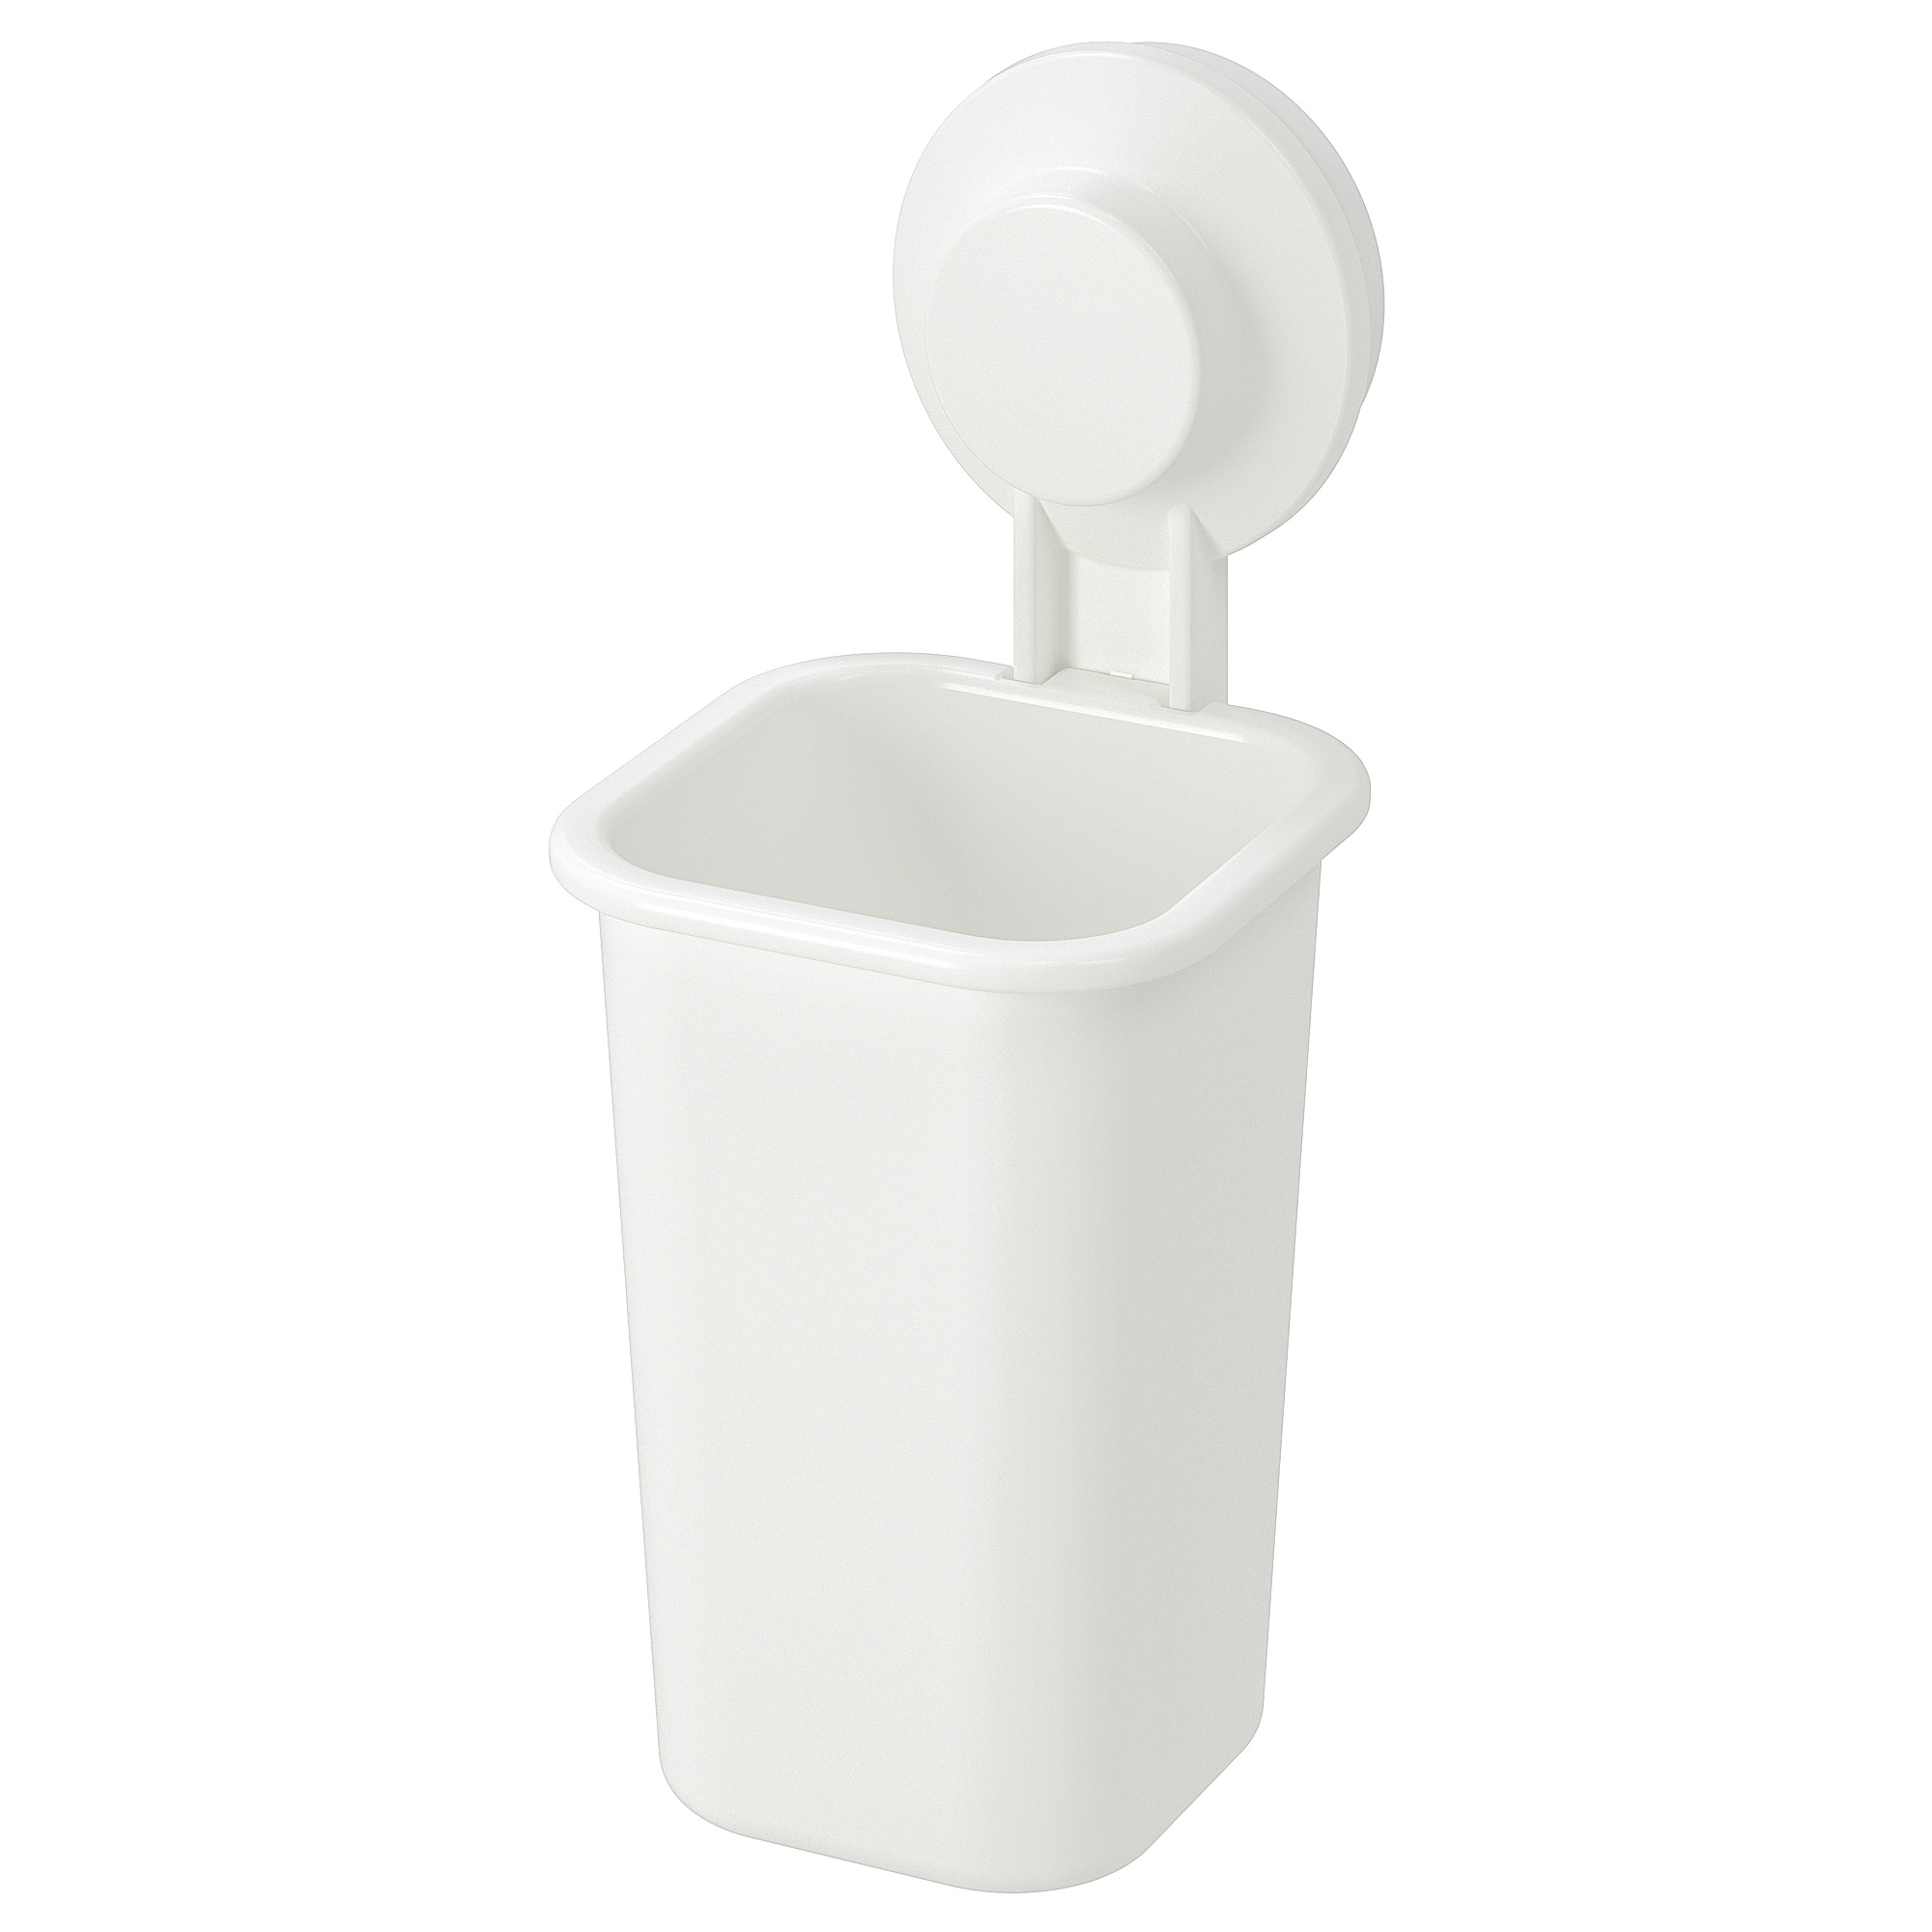 TISKEN toothbrush holder with suction cup